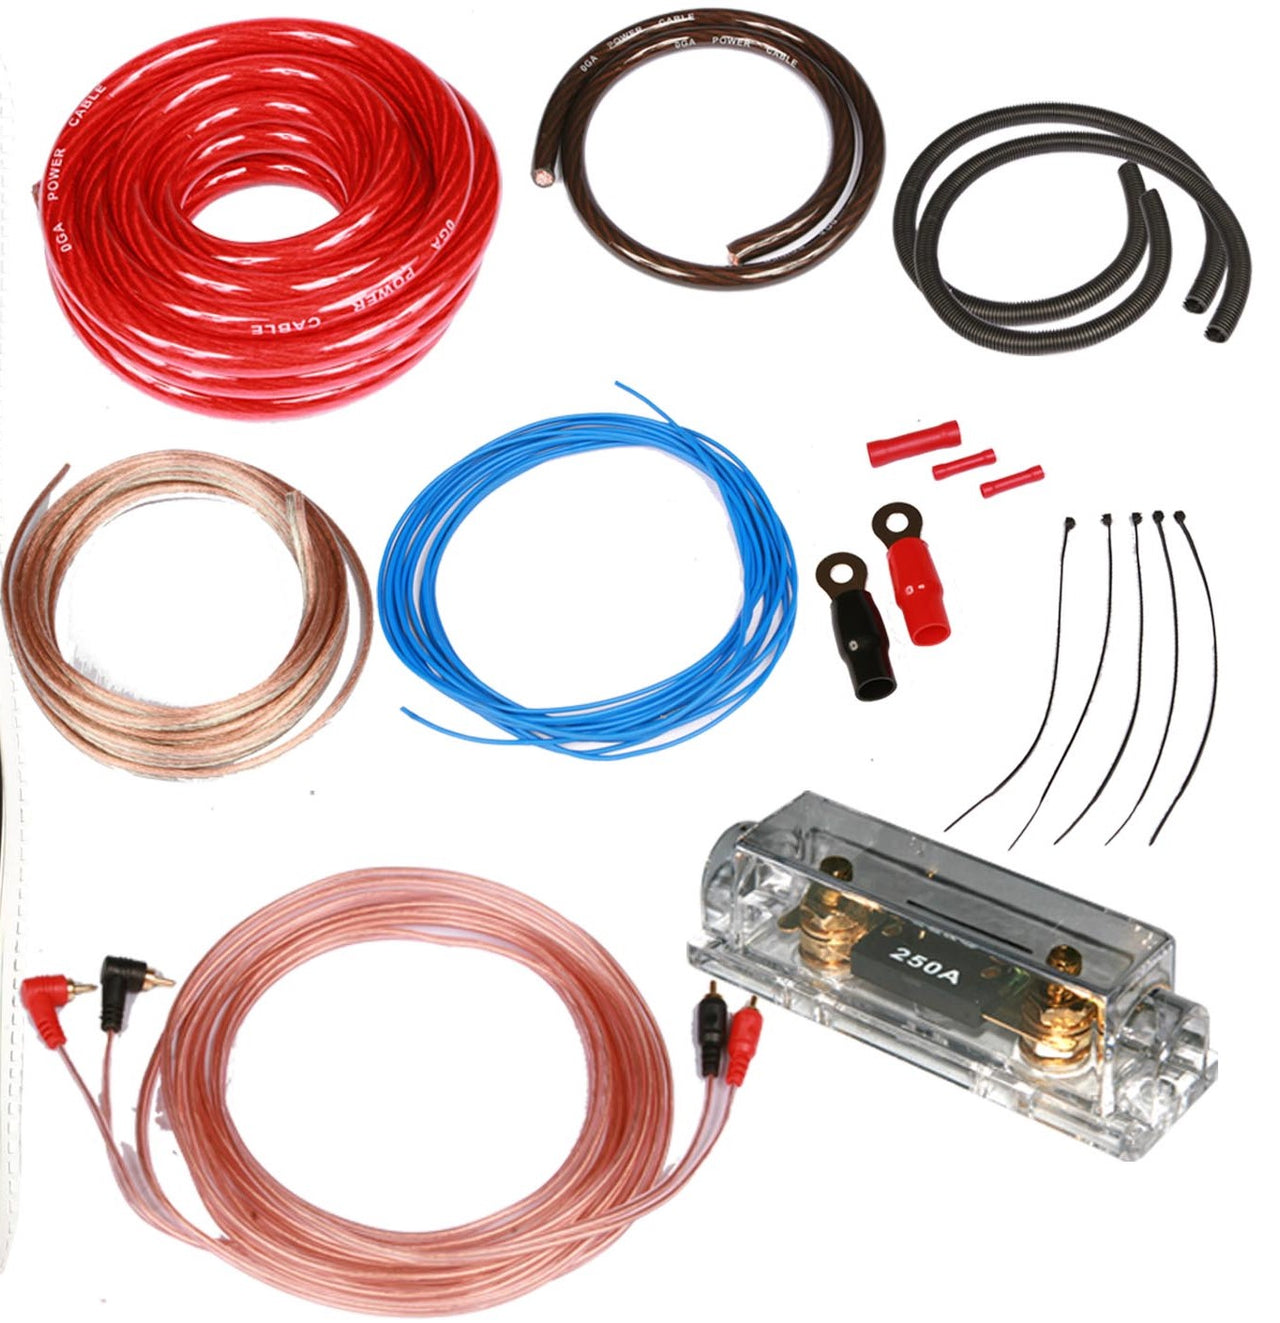 Absolute Kit 0 Complete 0 Gauge Amplifier Kit with RCA Interconnect Cable